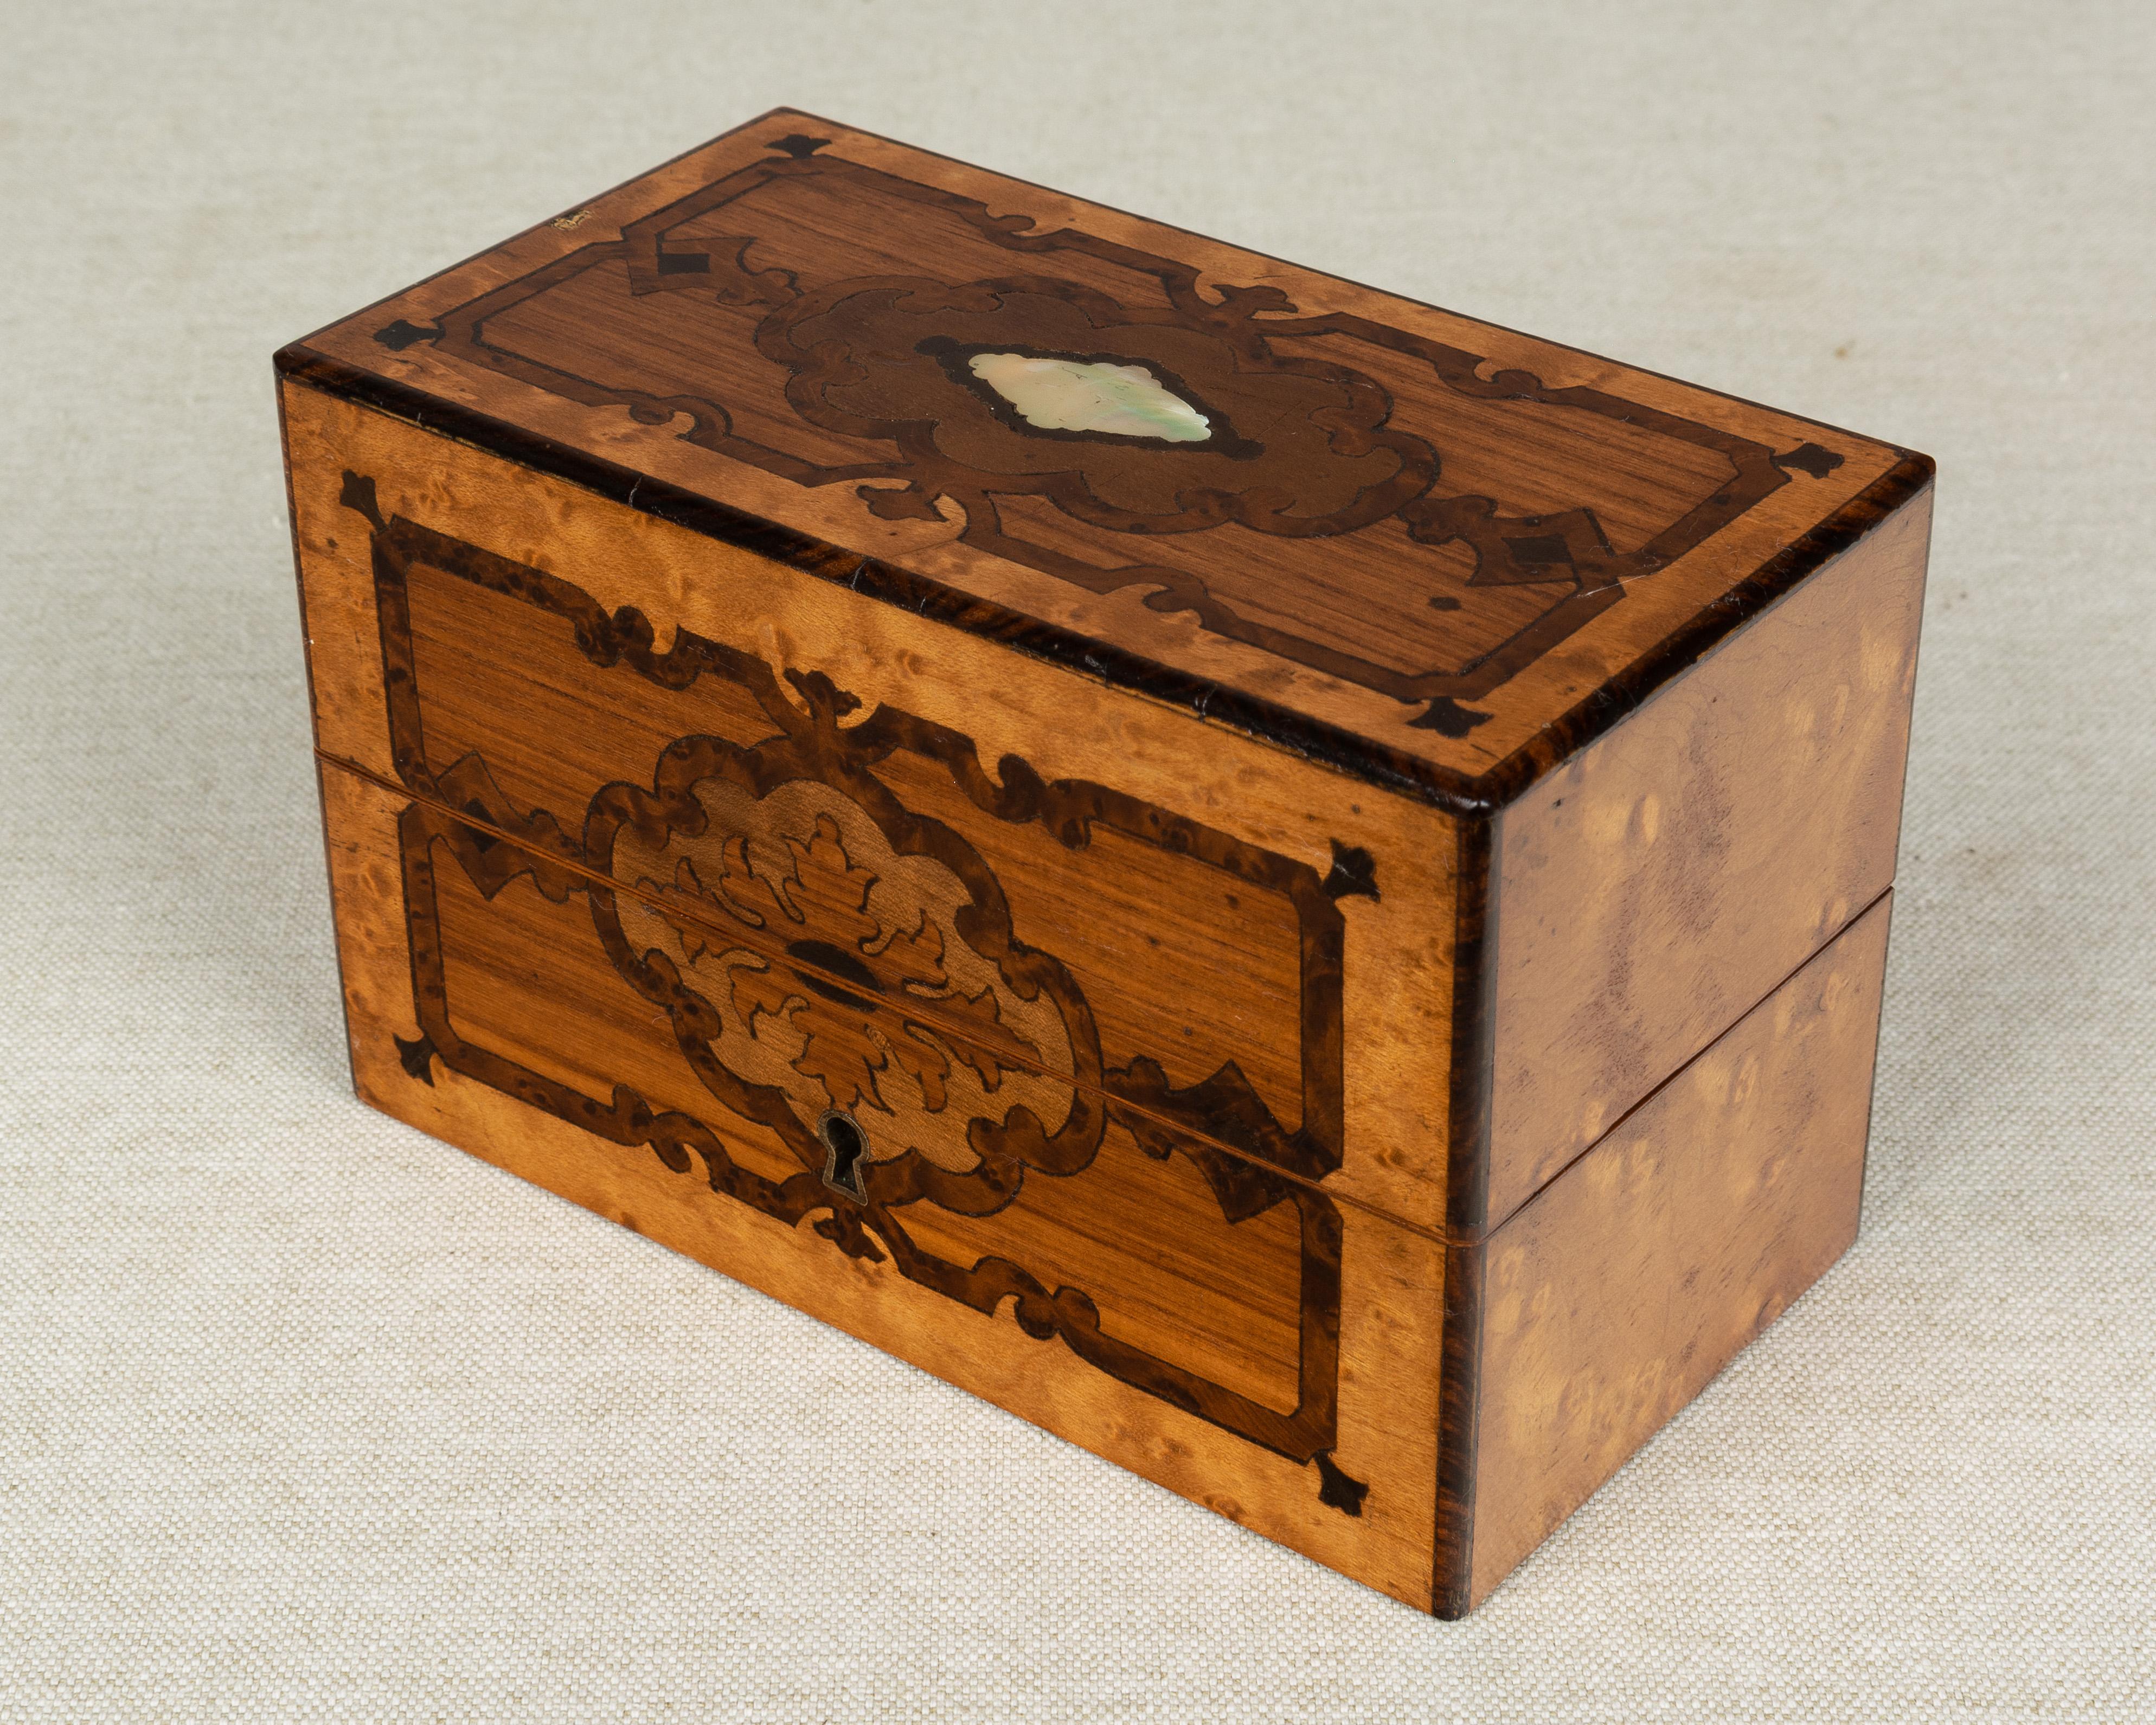 A 19th century French Napoleon III style marquetry perfume box attributed to Tahan, Paris. Made of rosewood with bird's-eye maple veneer and decorative inlay of various woods and mother of pearl. Lid has a lock and key and hinges open to reveal a